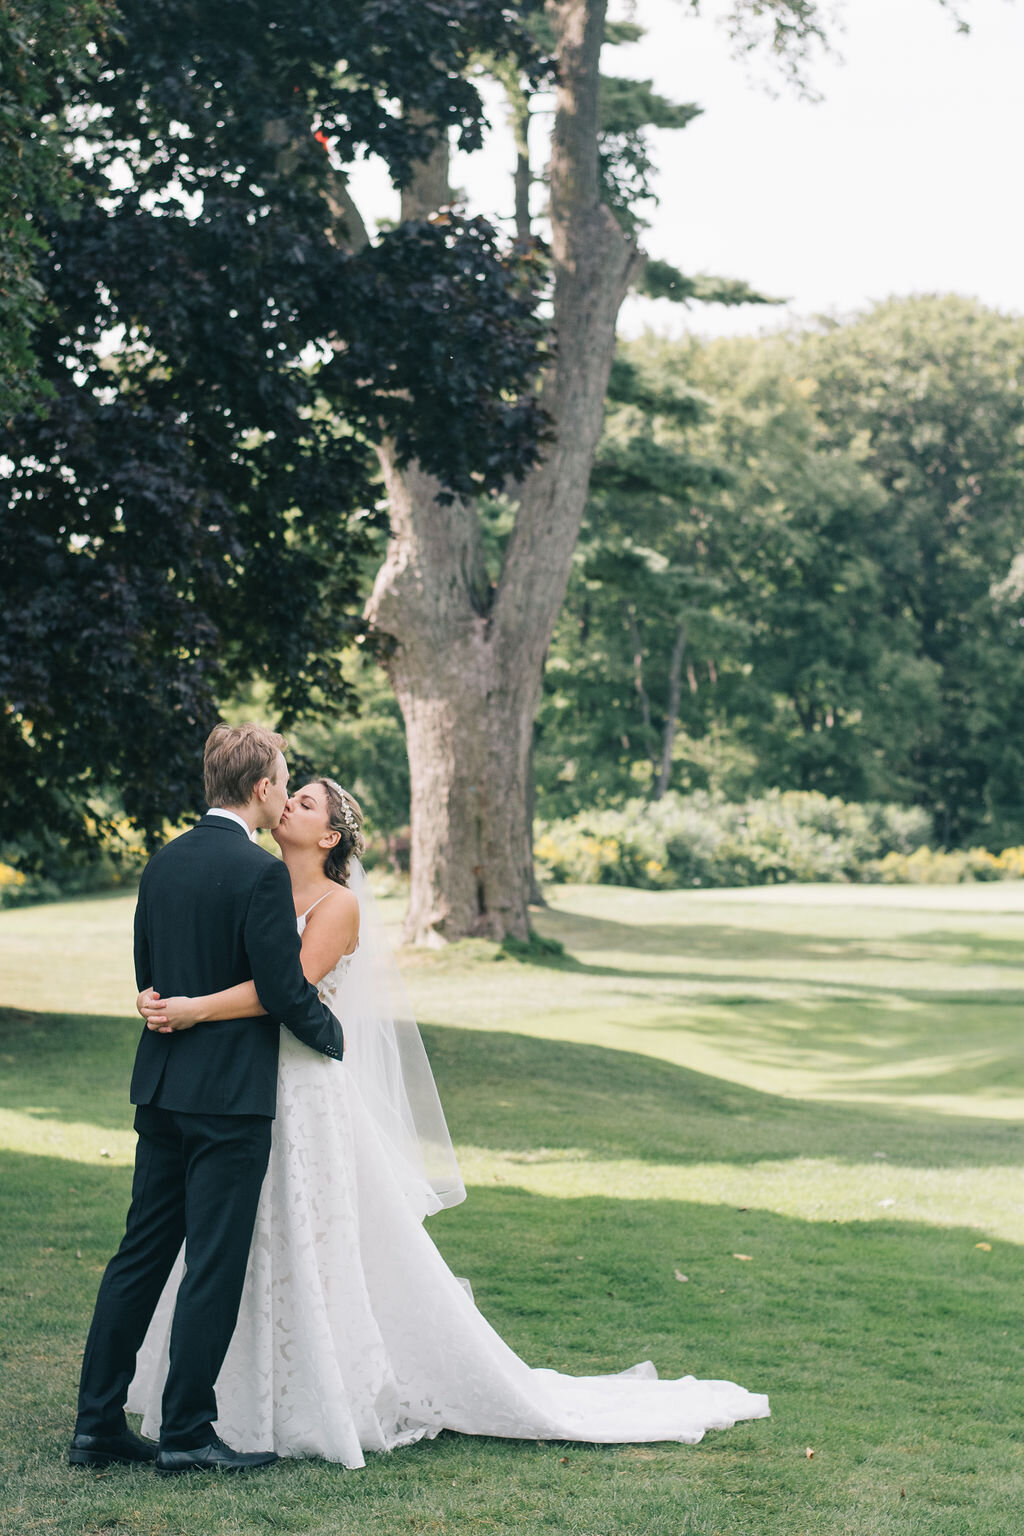 Bride and groom's emotional first look on their wedding day at the Toronto Golf Club photographed by Toronto Wedding Photographers, Ugo Photography